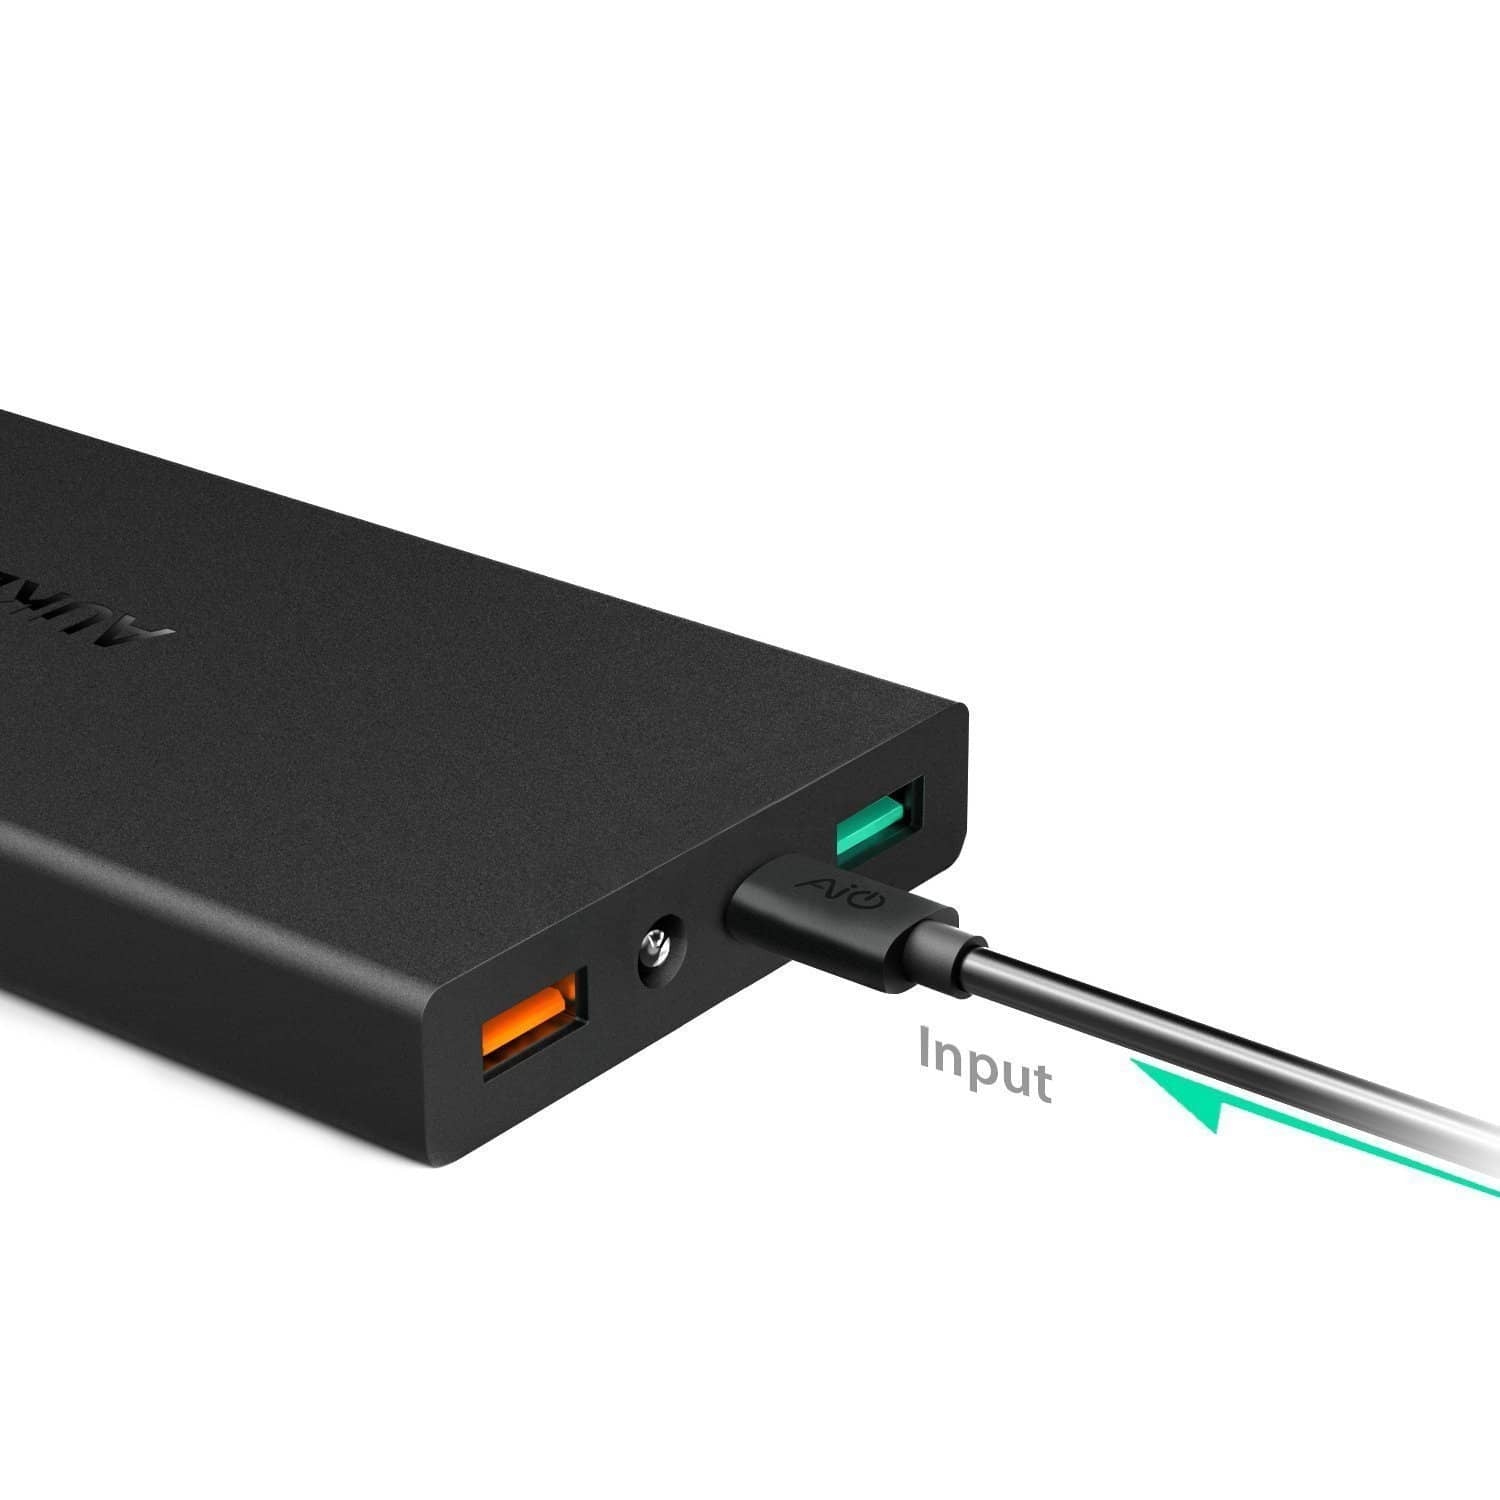 AUKEY PB-T9 16000mAh Quick Charge 3.0 Power Bank - Aukey Malaysia Official Store